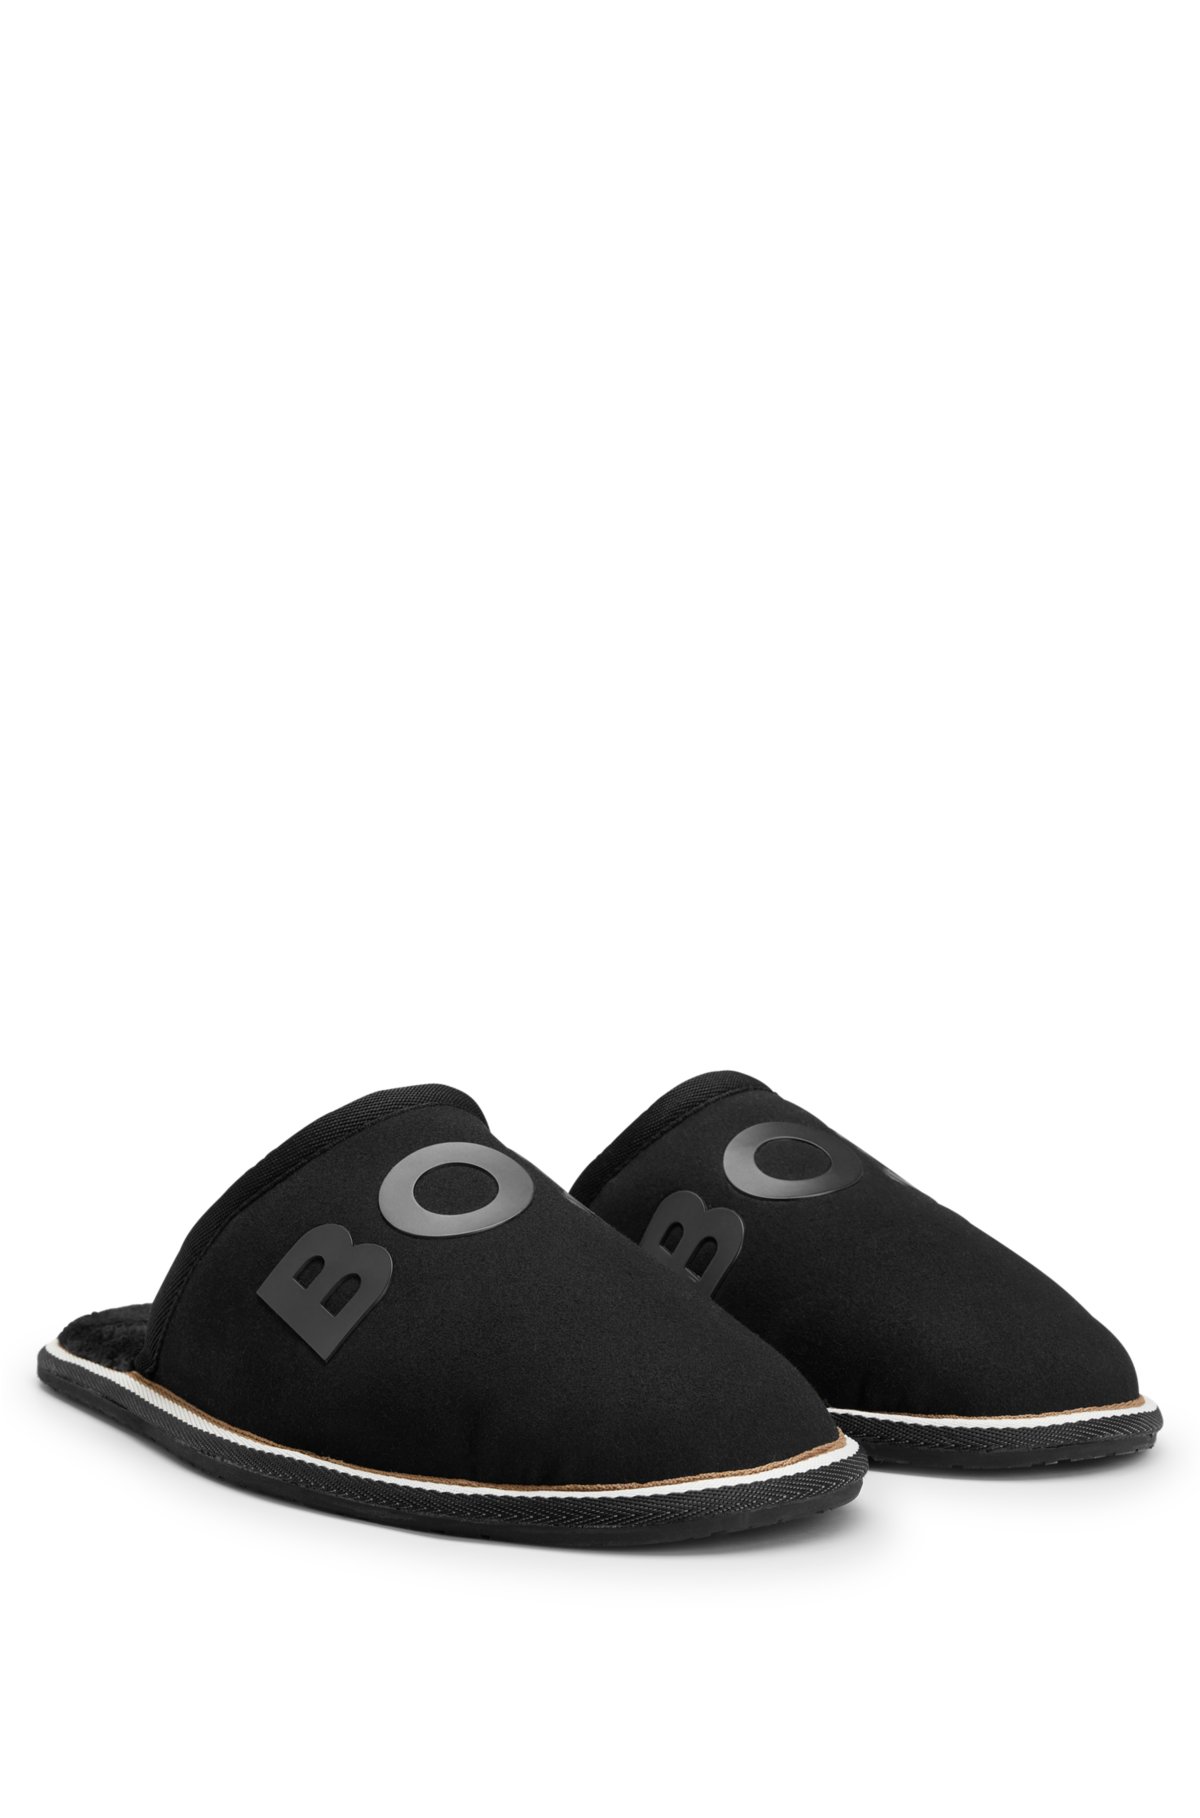 BOSS Monogram-logo slippers with rubber outsole and stripe